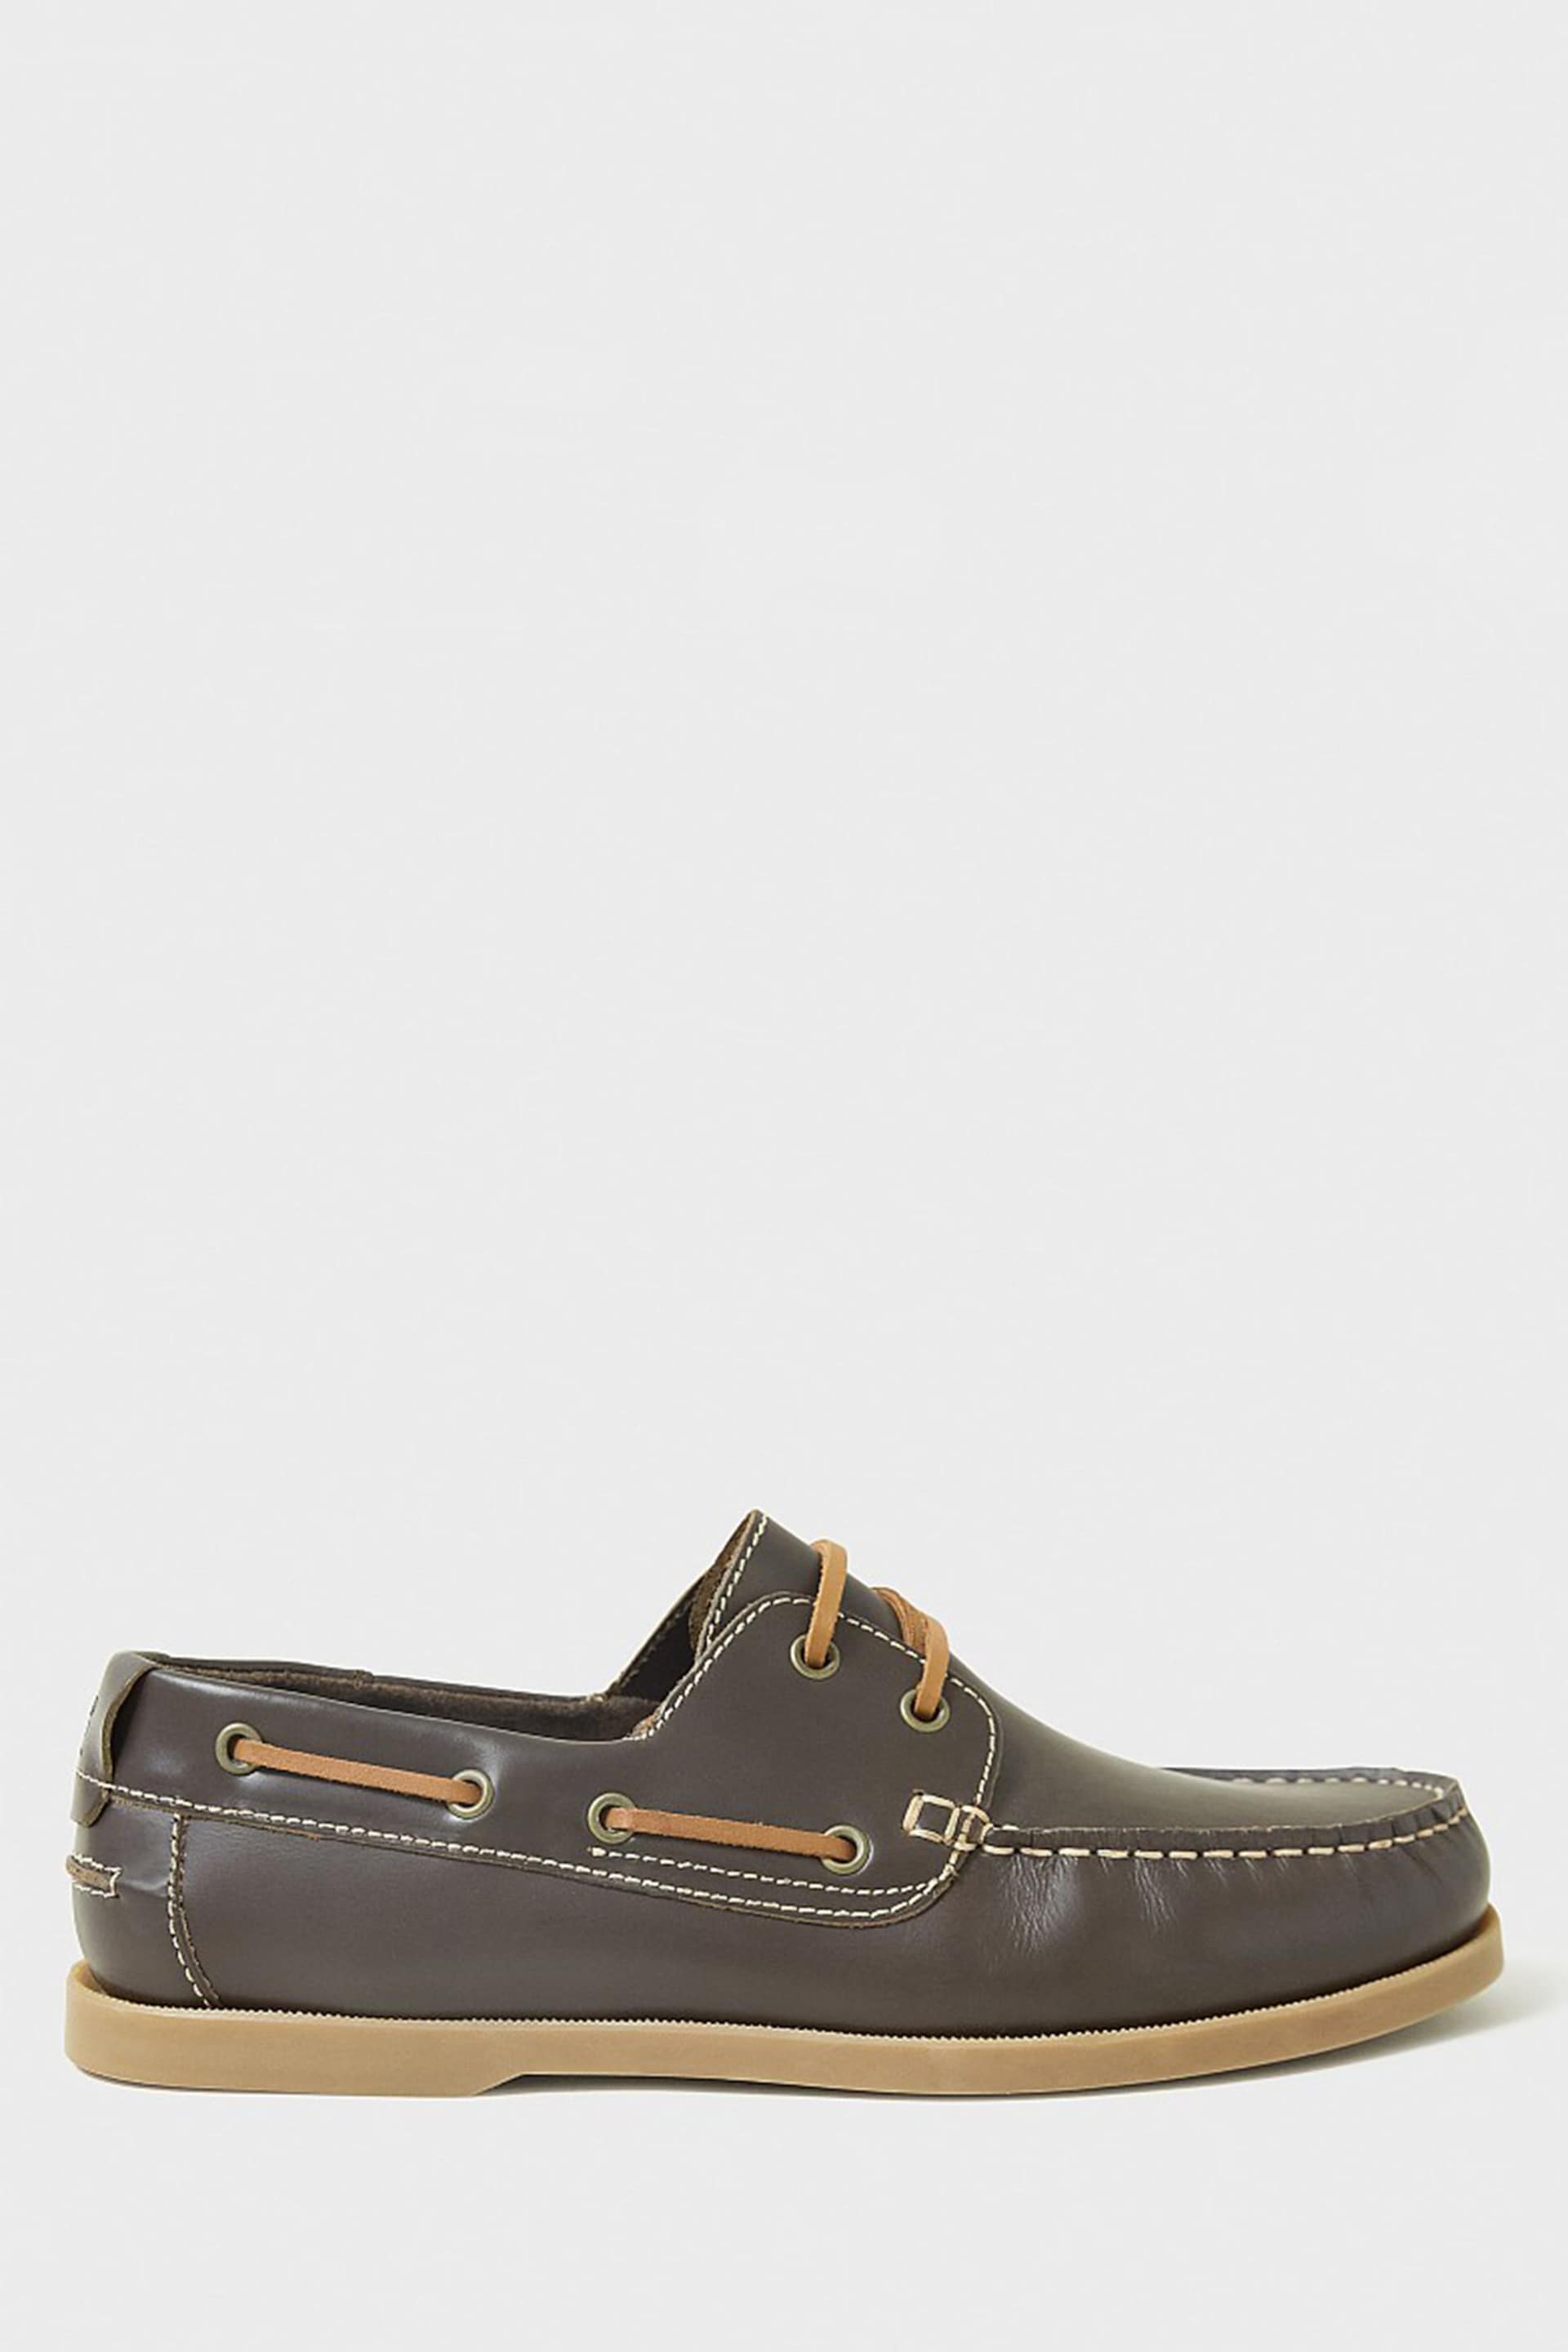 Crew Clothing Austell Leather Deck Shoes - Image 3 of 5